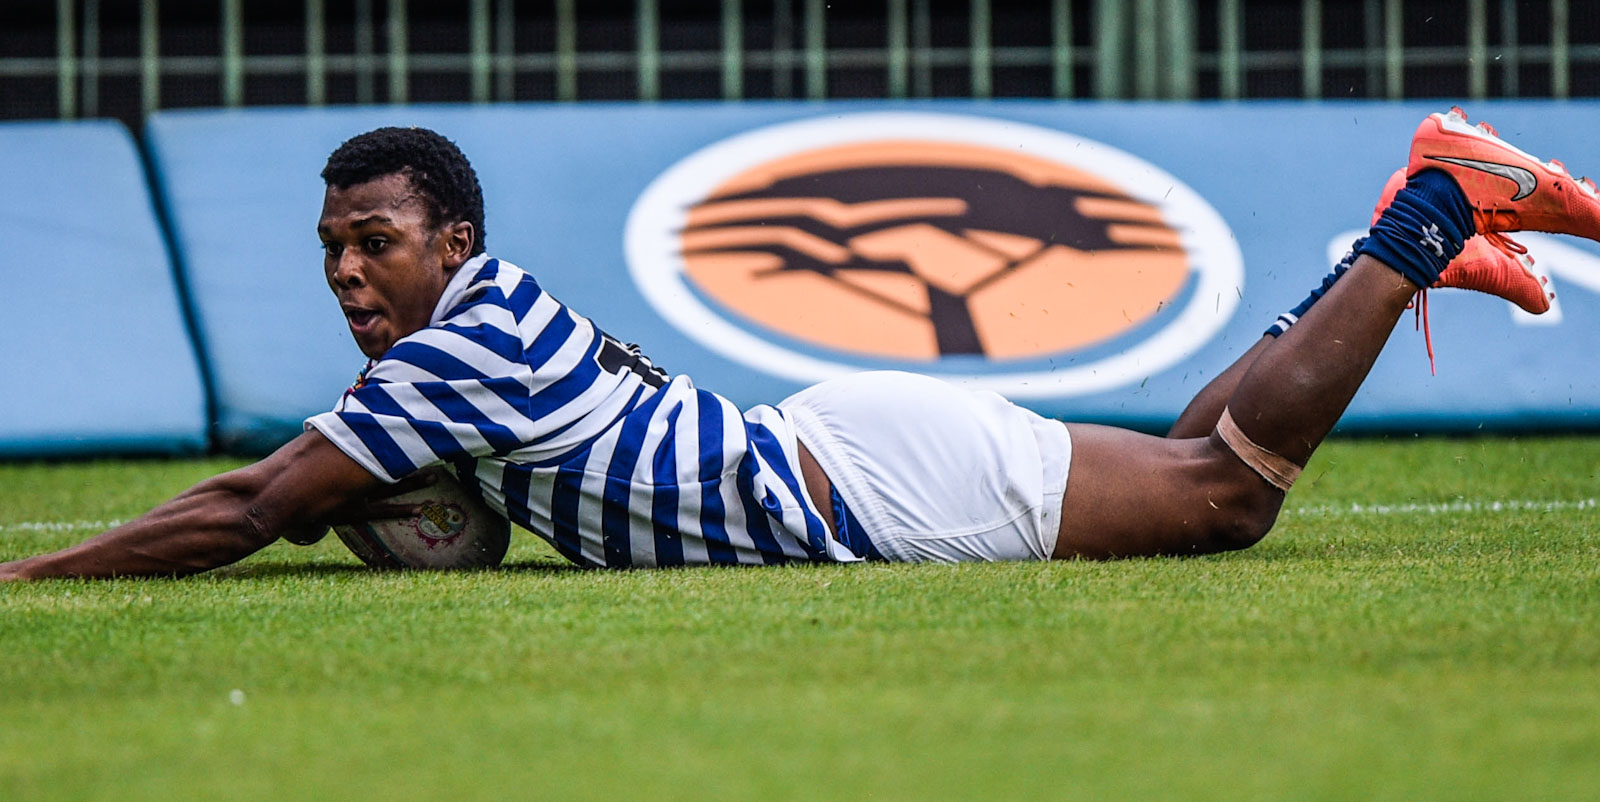 UCT scored no less than eight tries as they trounced Shimlas on Thursday.